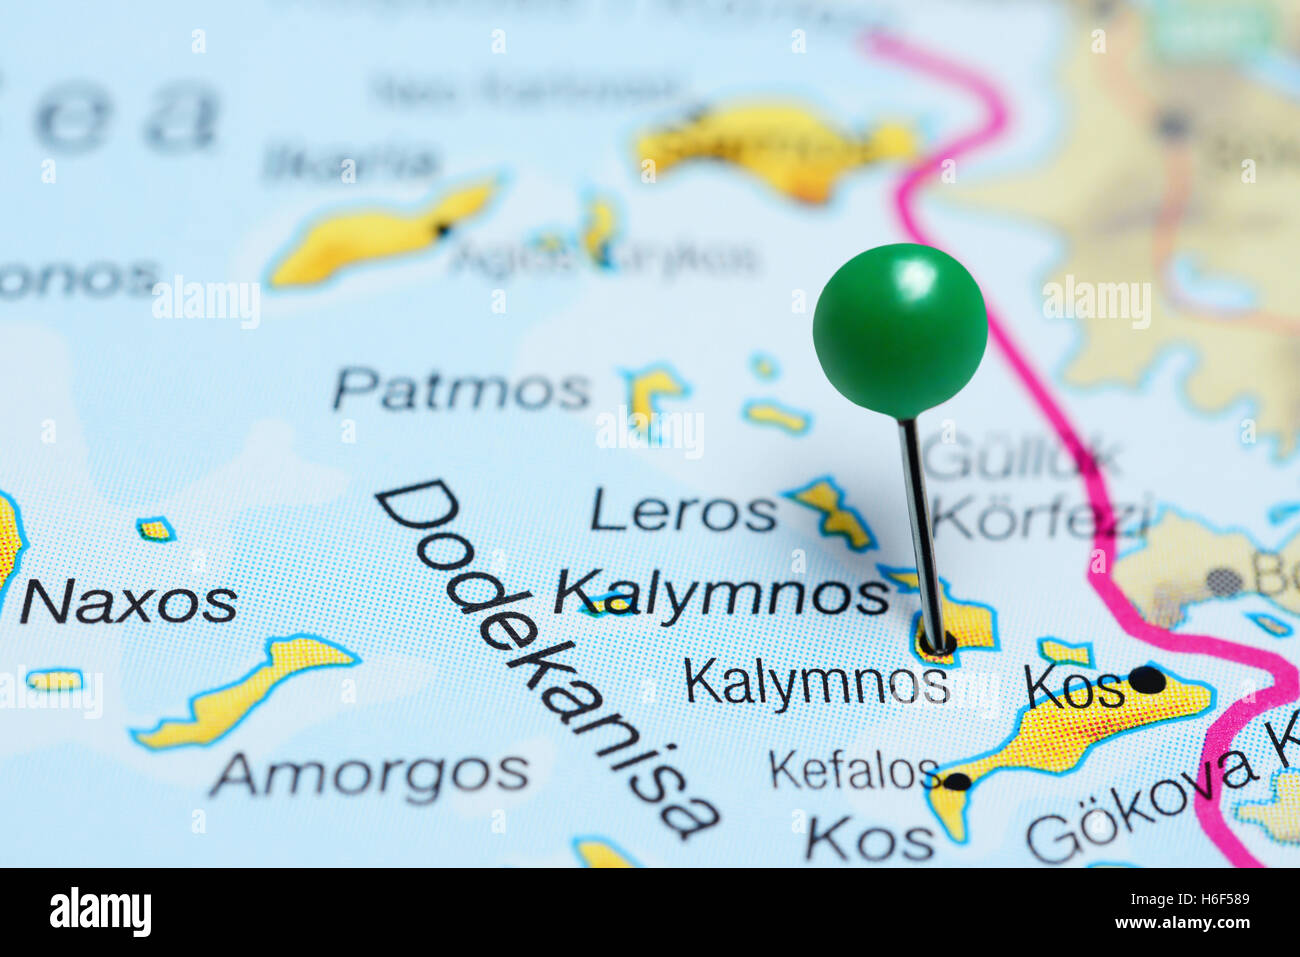 Kalymnos pinned on a map of Greece Stock Photo